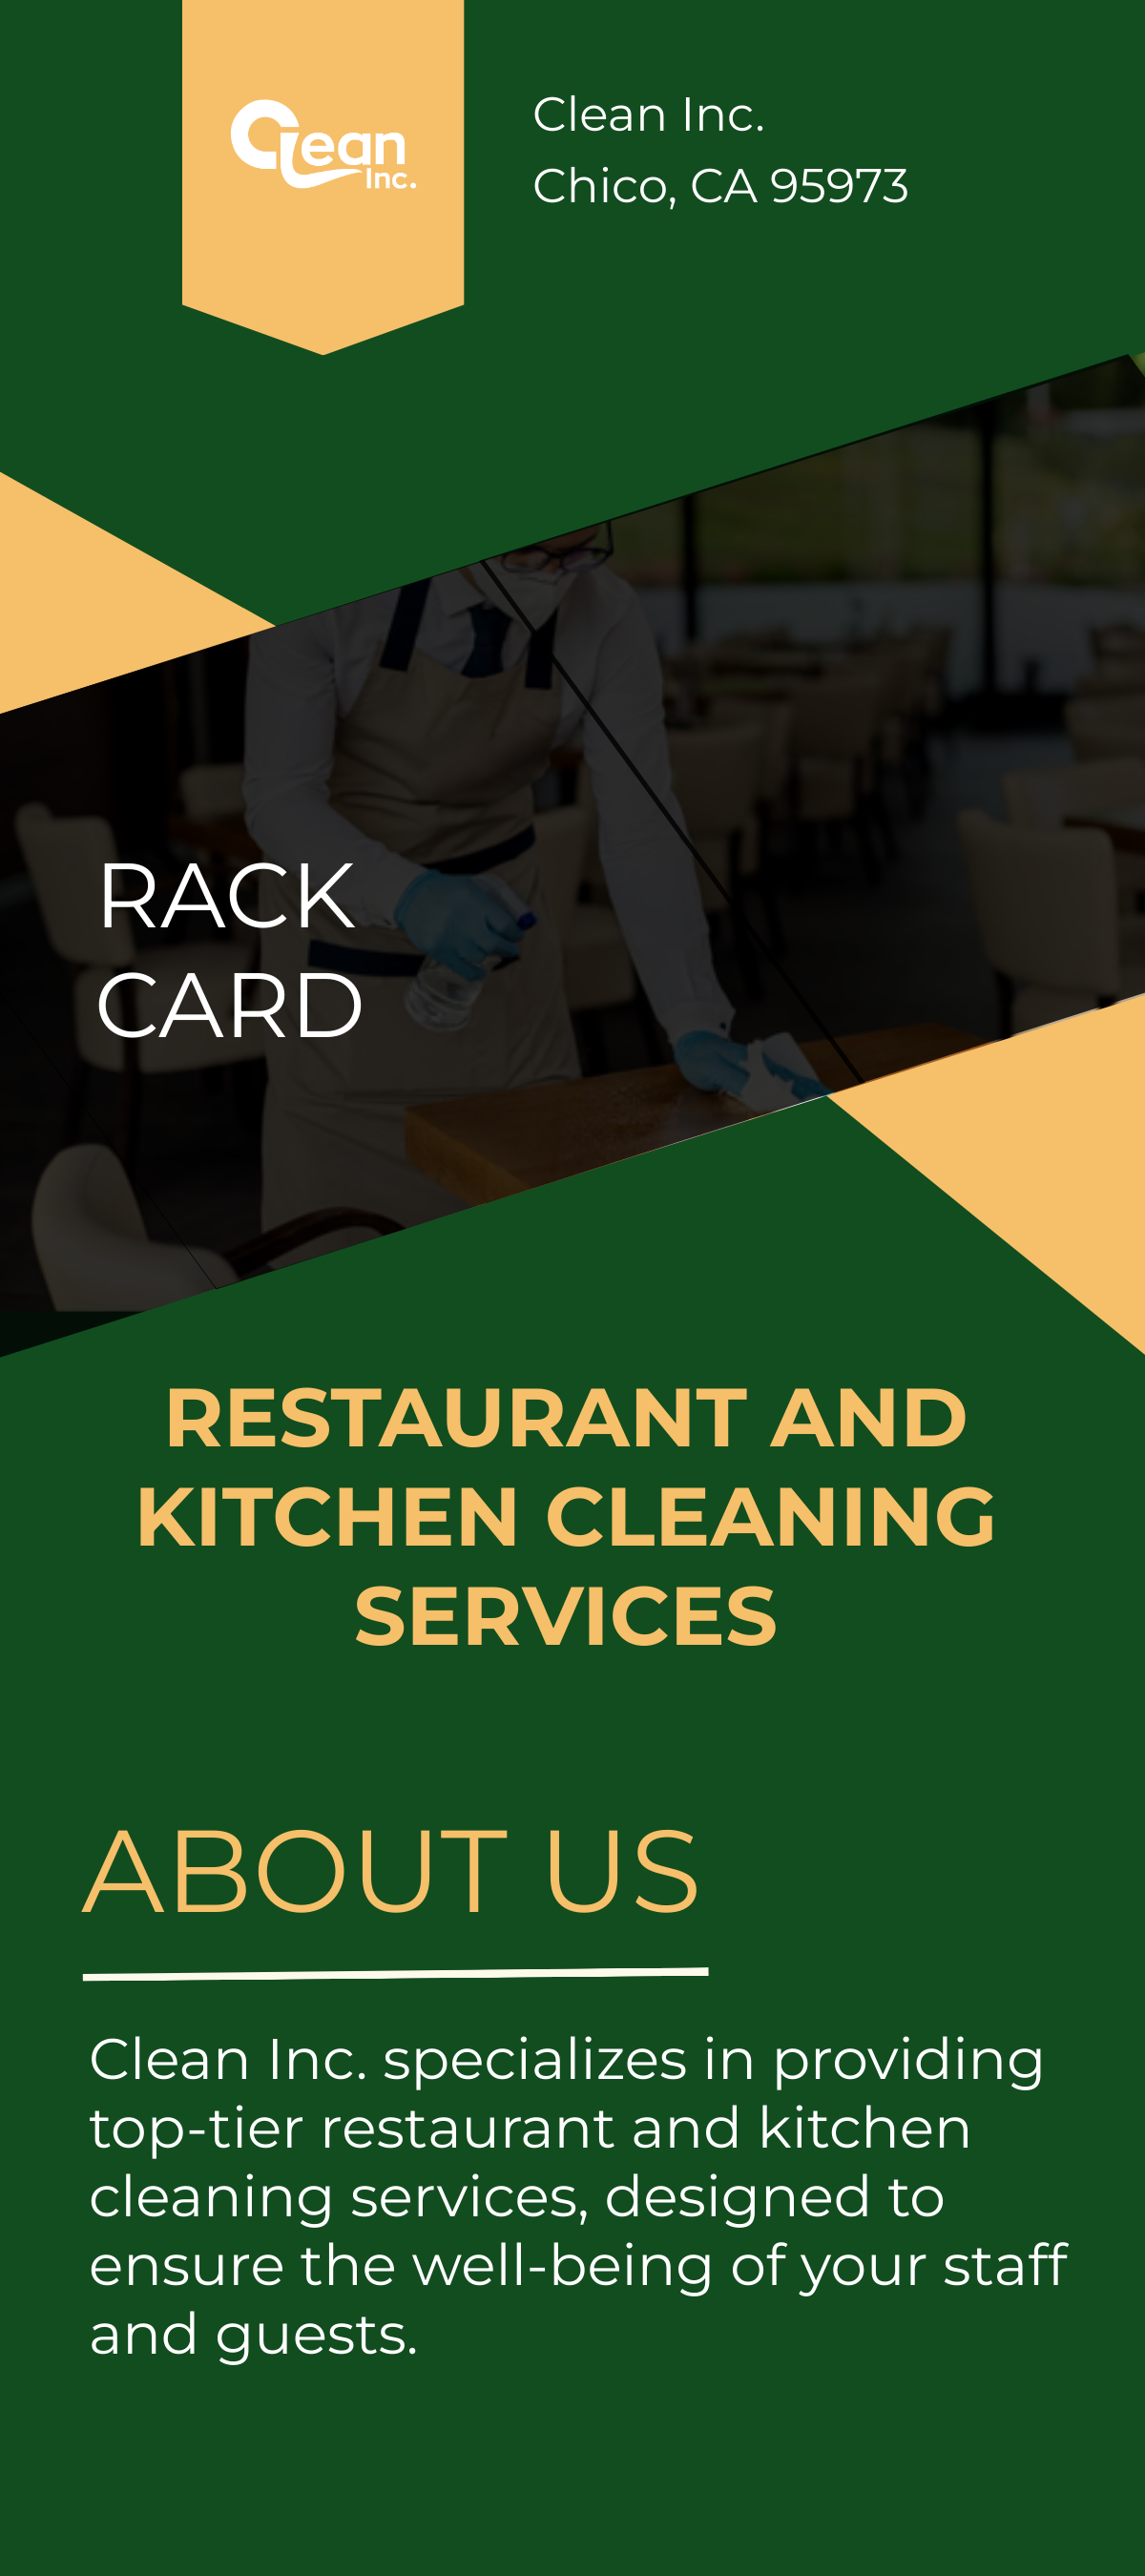 Restaurant and Kitchen Cleaning Services Rack Card